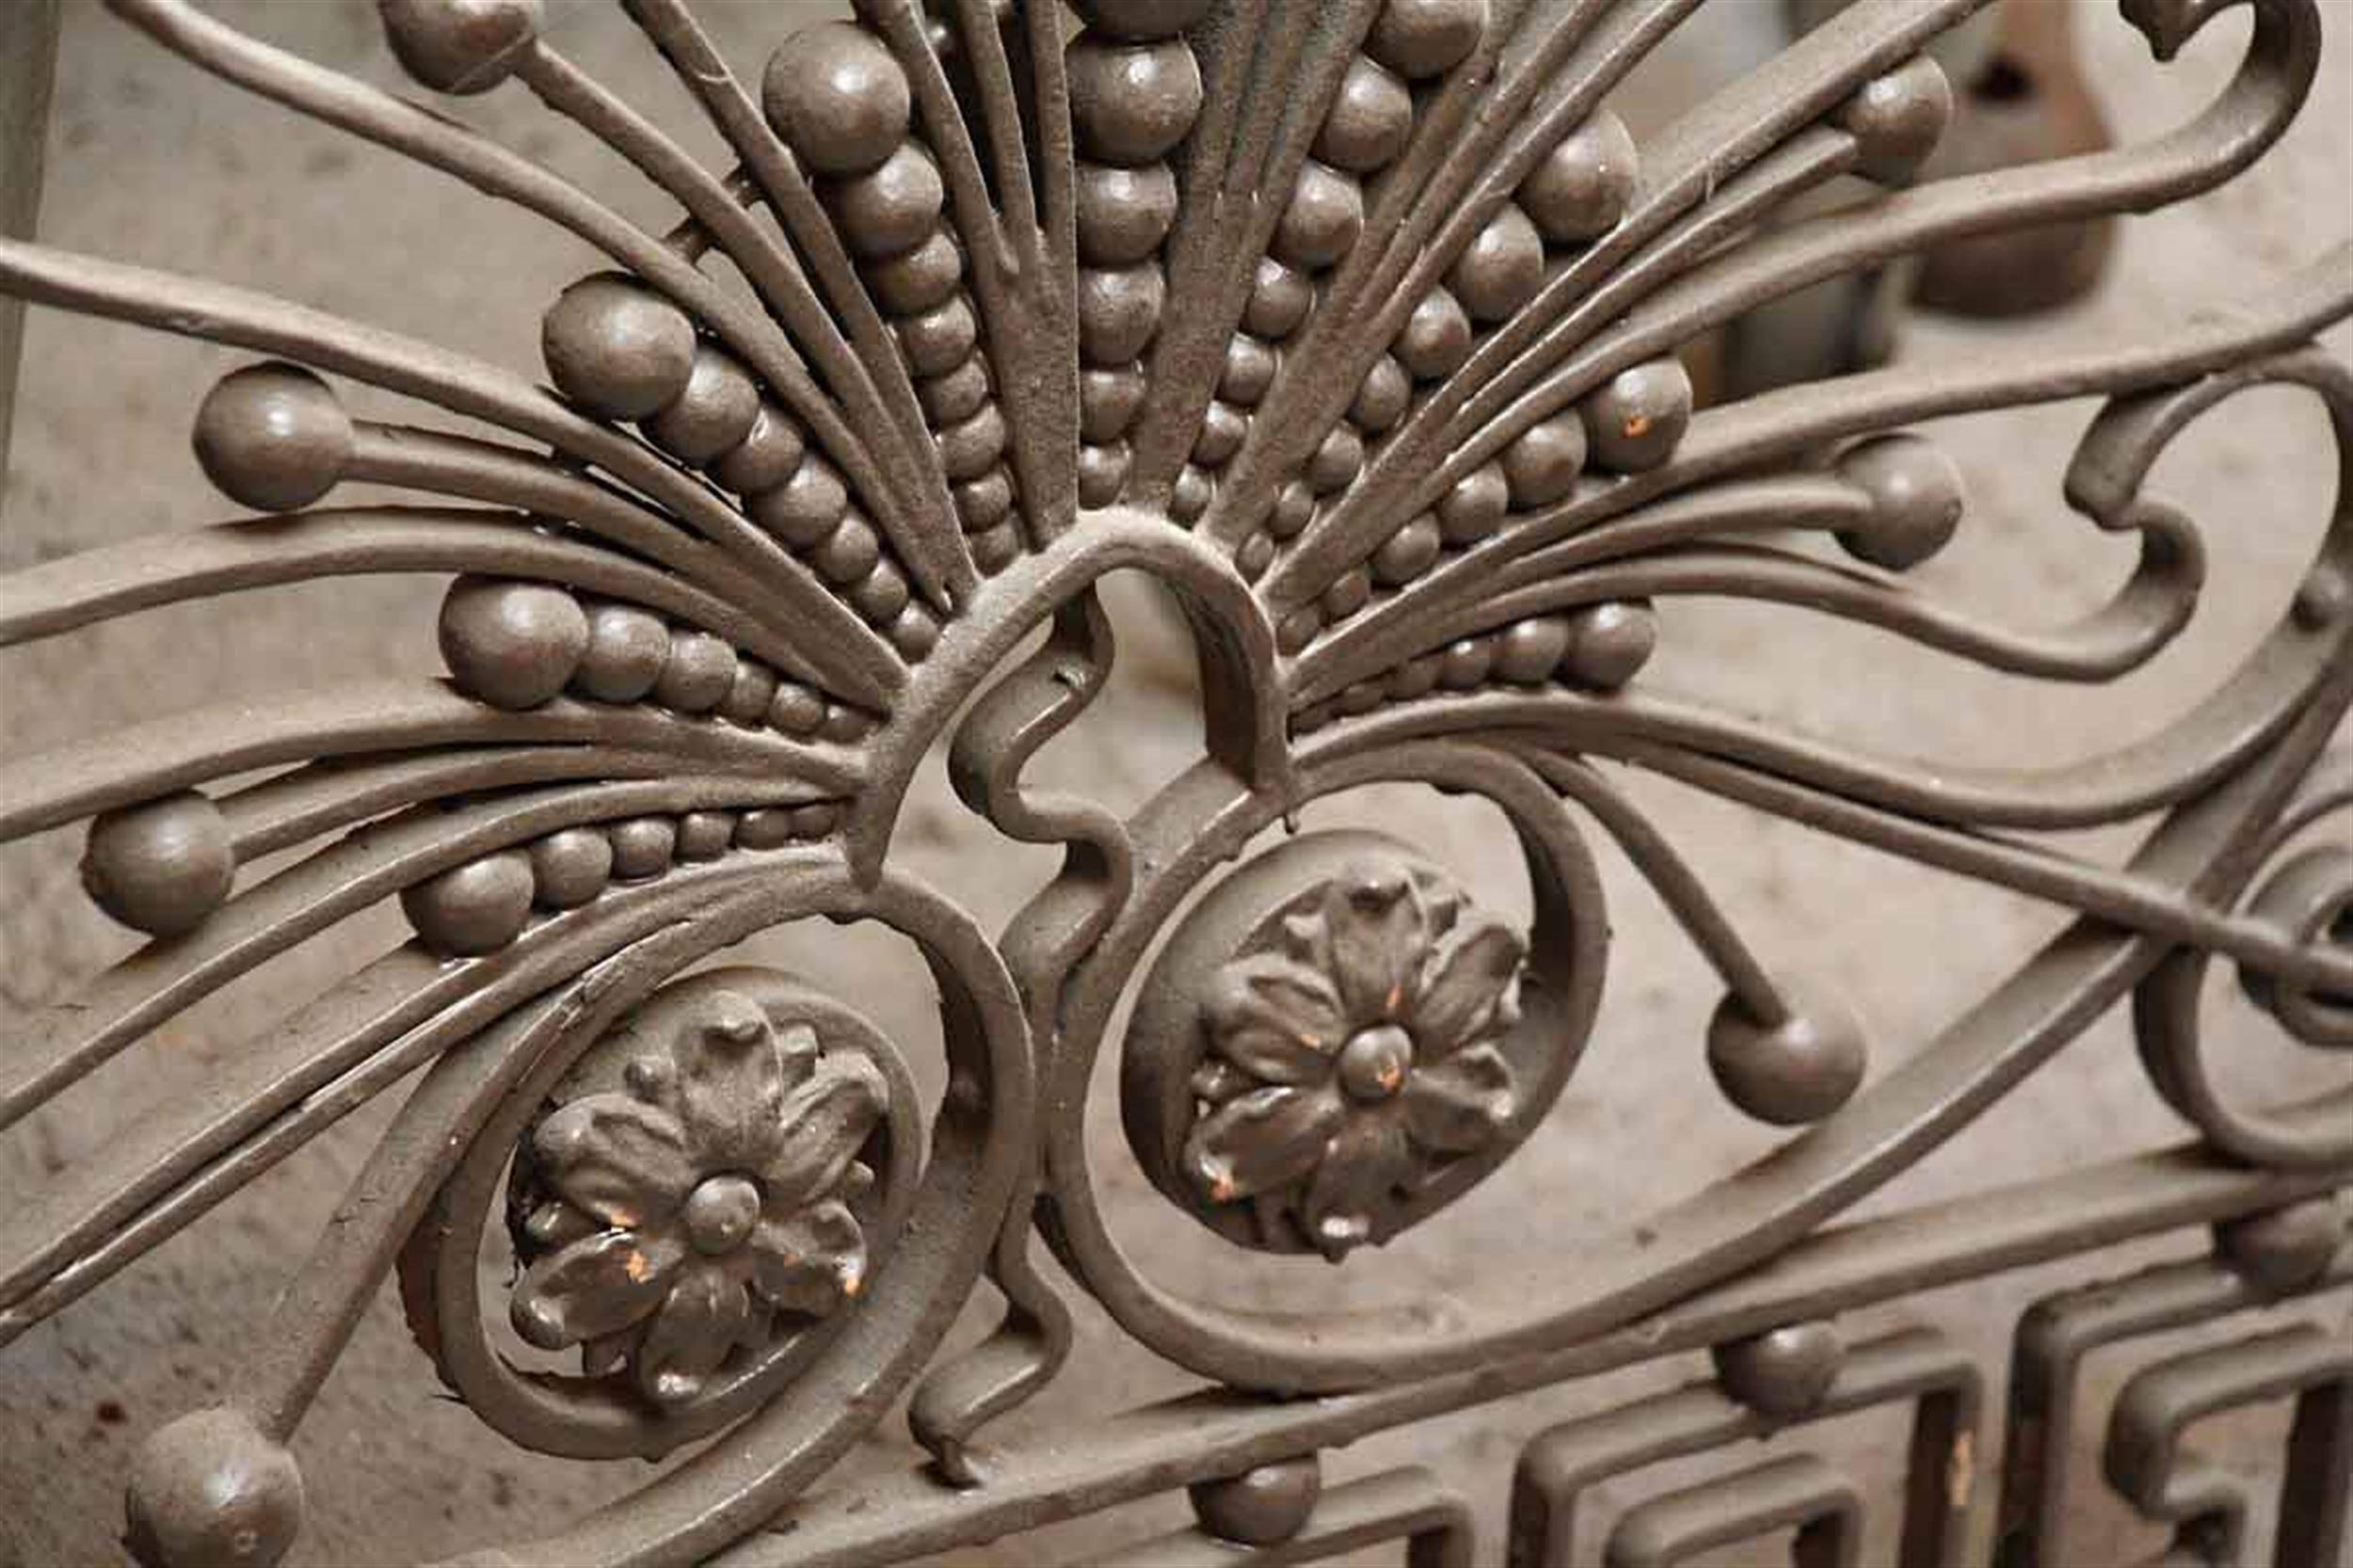 American 1893 Ornate Wrought Iron Grill from the United Charities Building in Manhattan